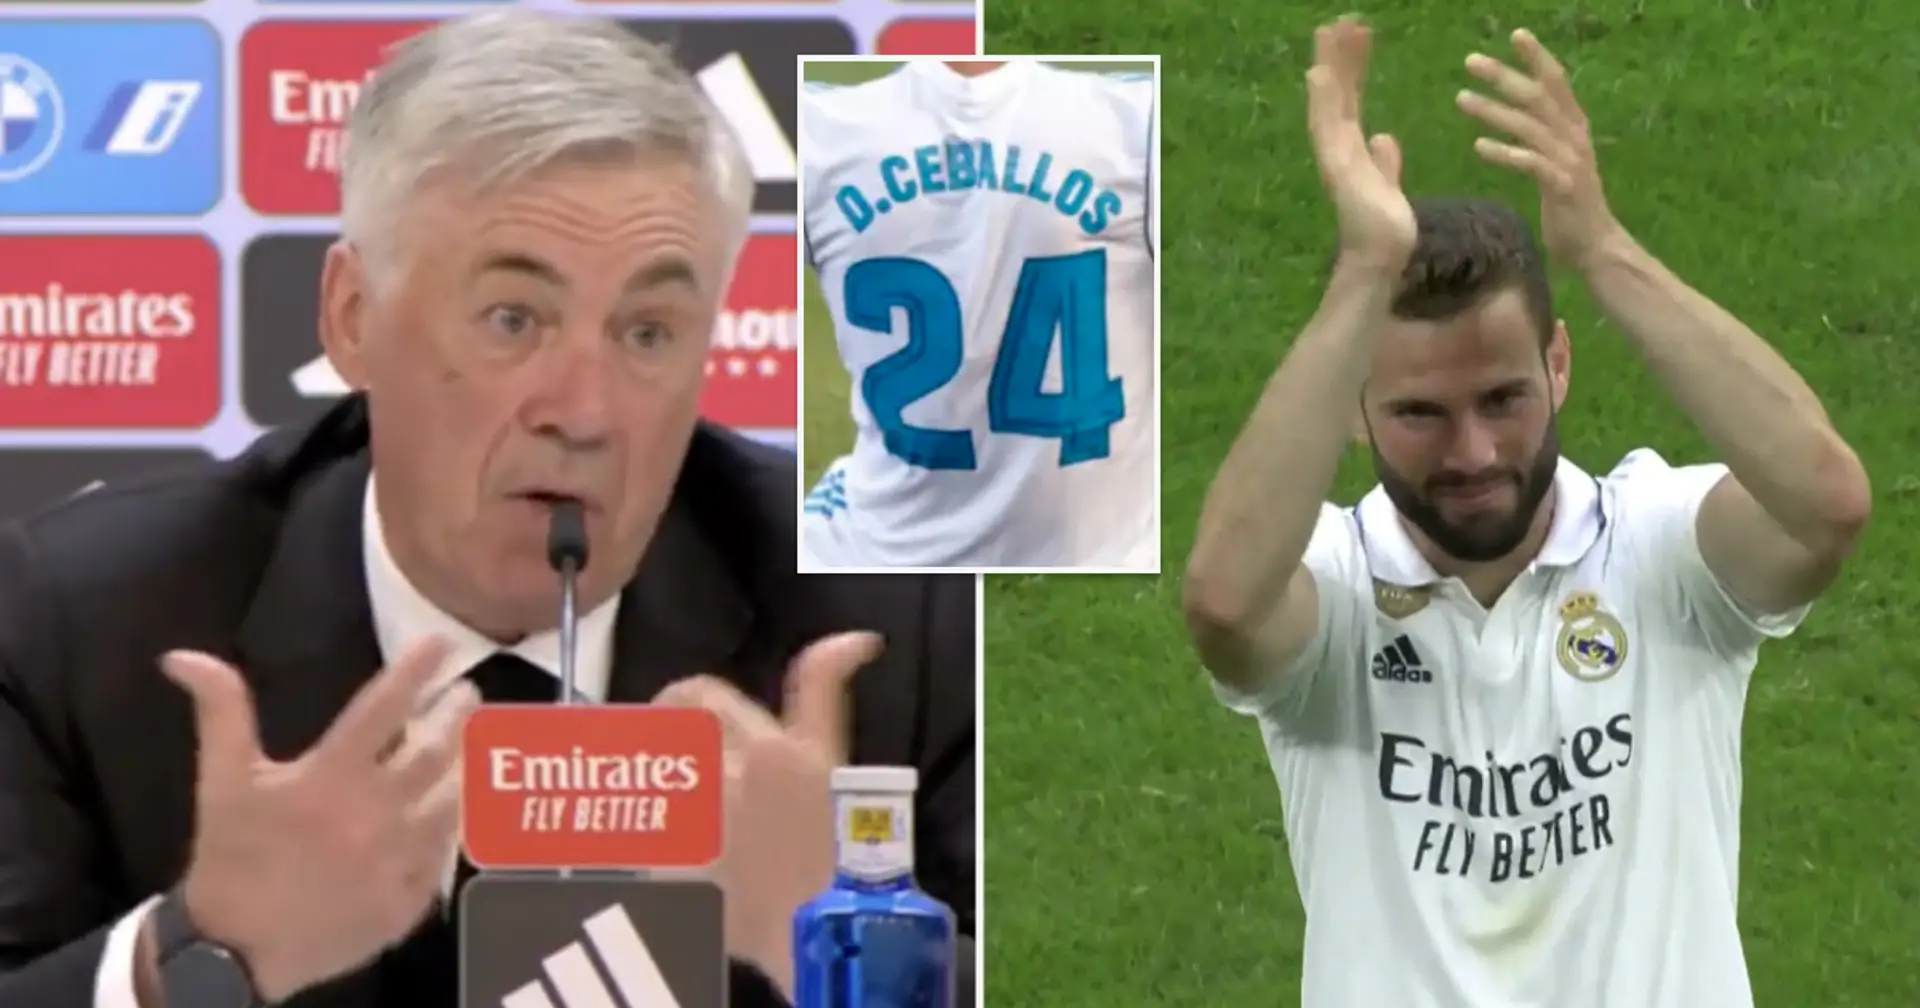 Will Nacho and Ceballos stay at Madrid? Ancelotti provides update on players' future